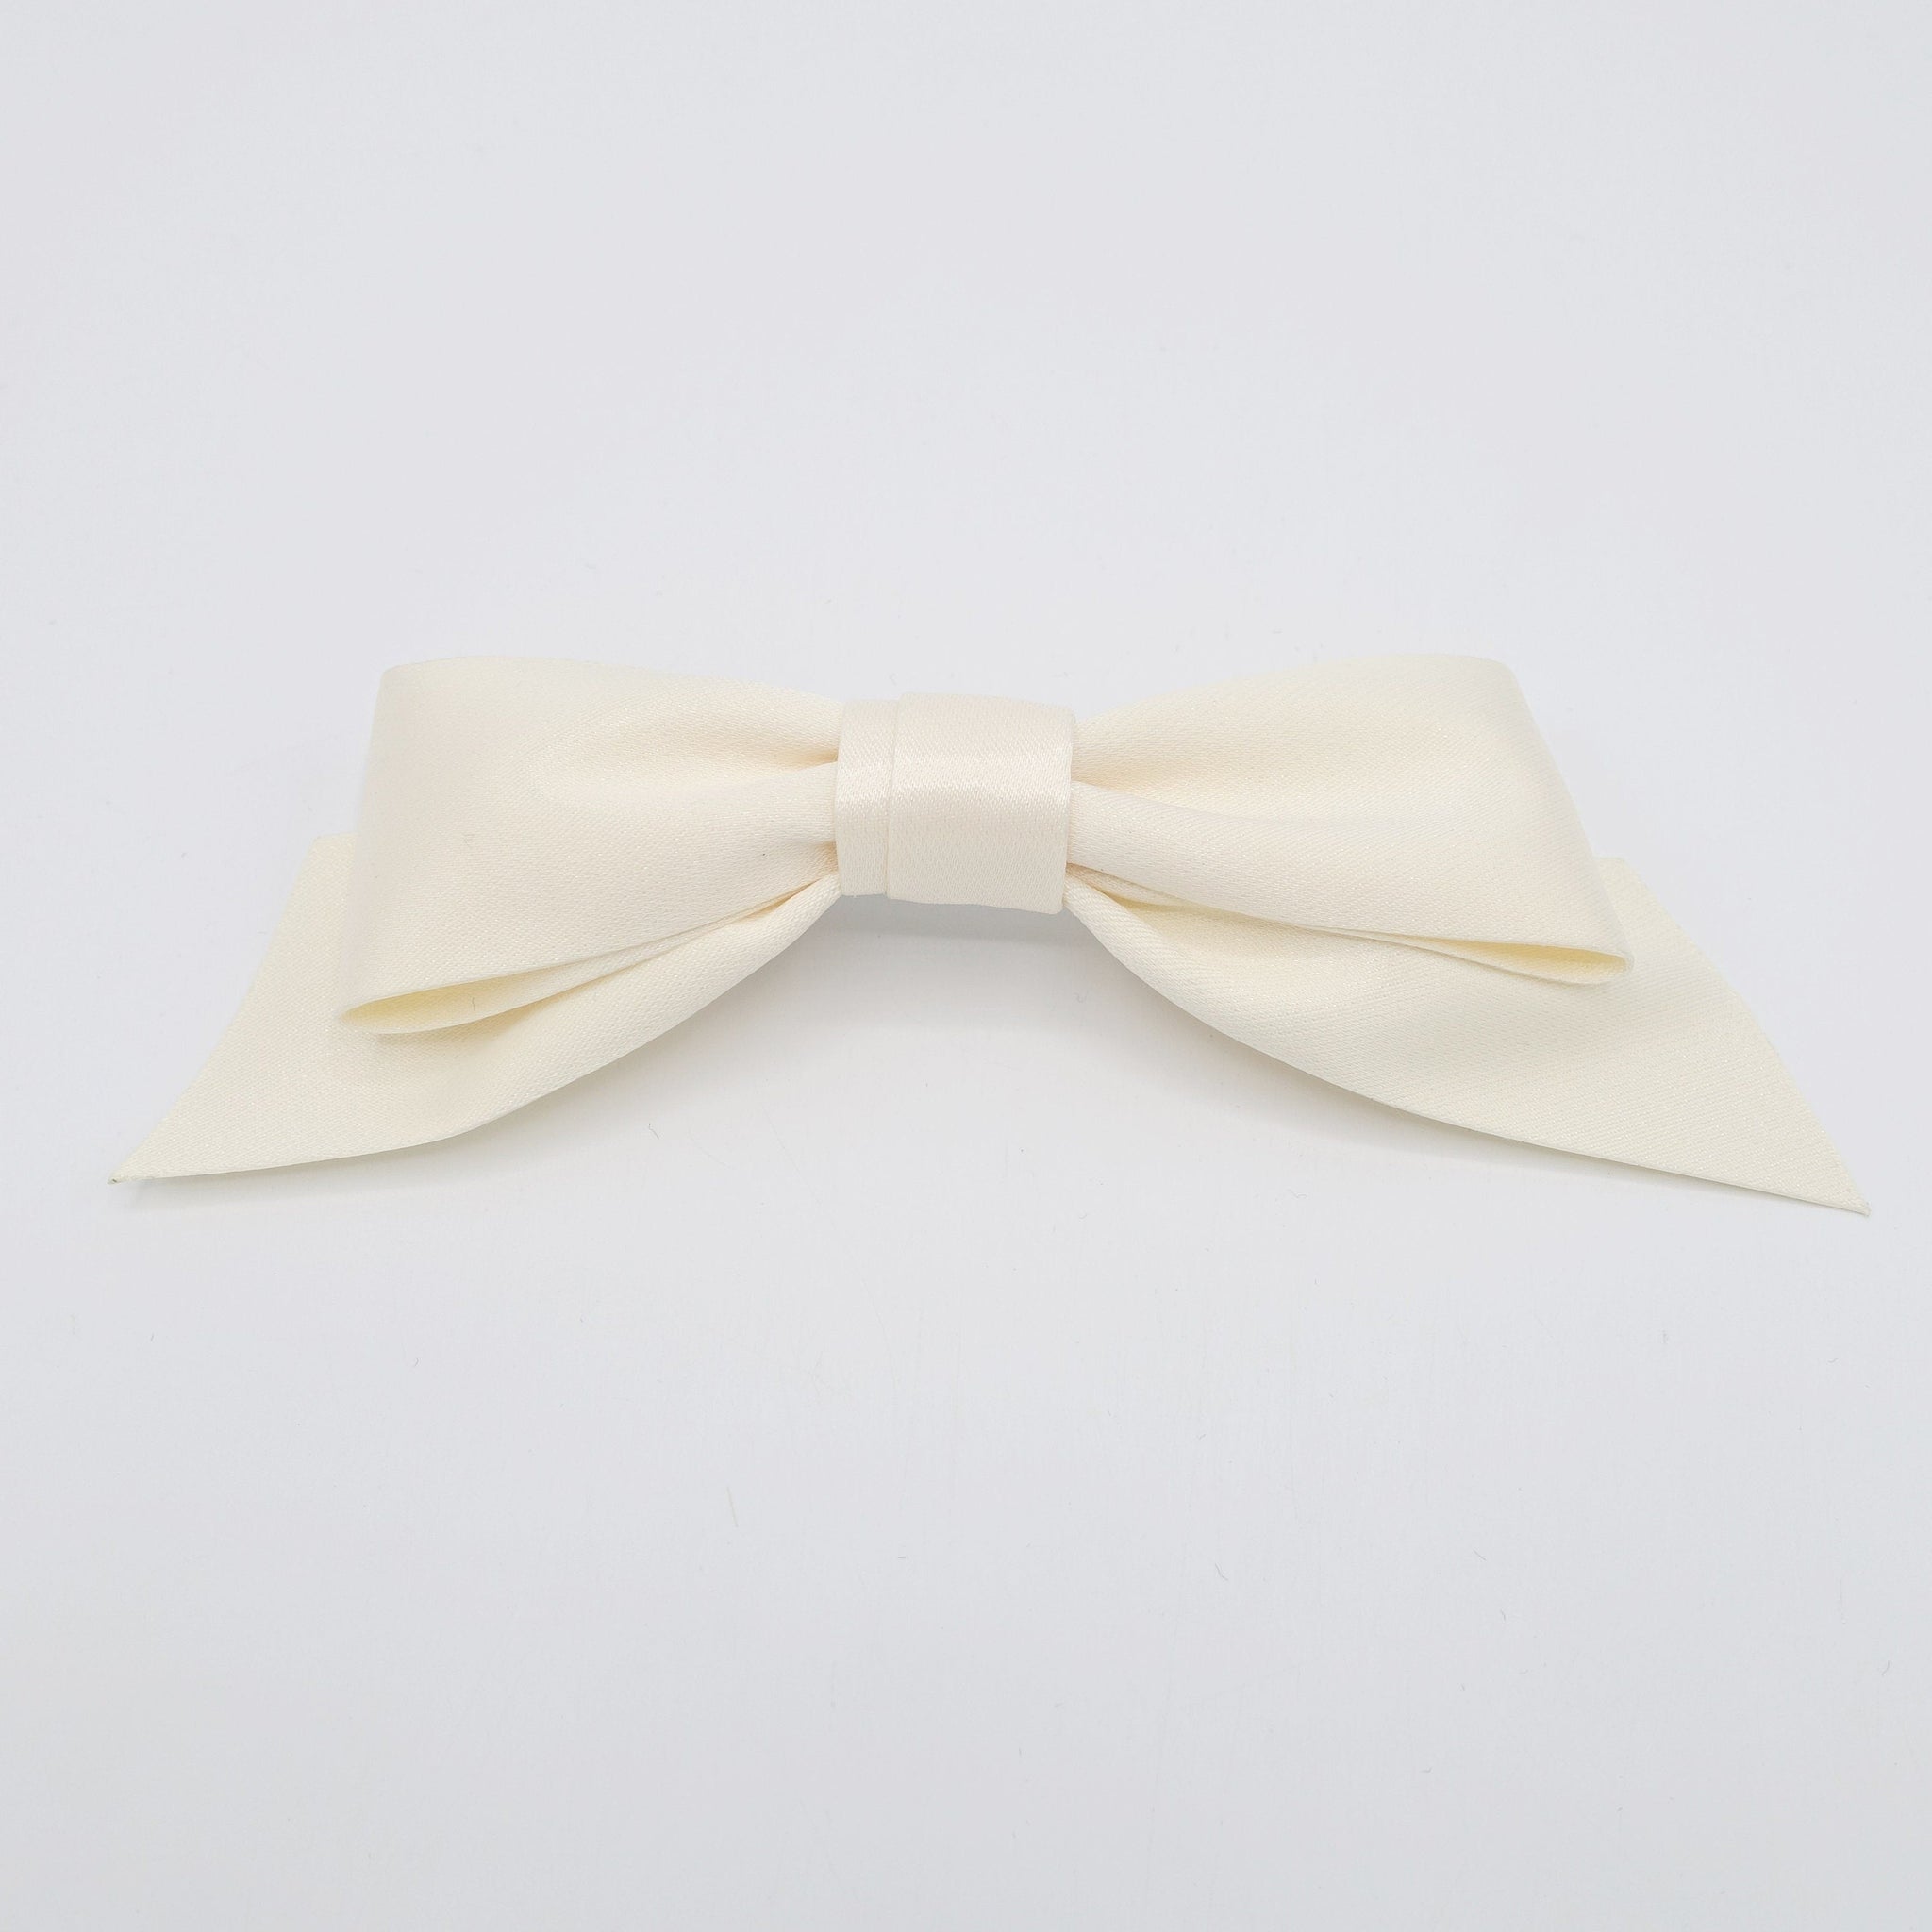 veryshine.com Barrette (Bow) glossy satin layered hair bow basic style for women